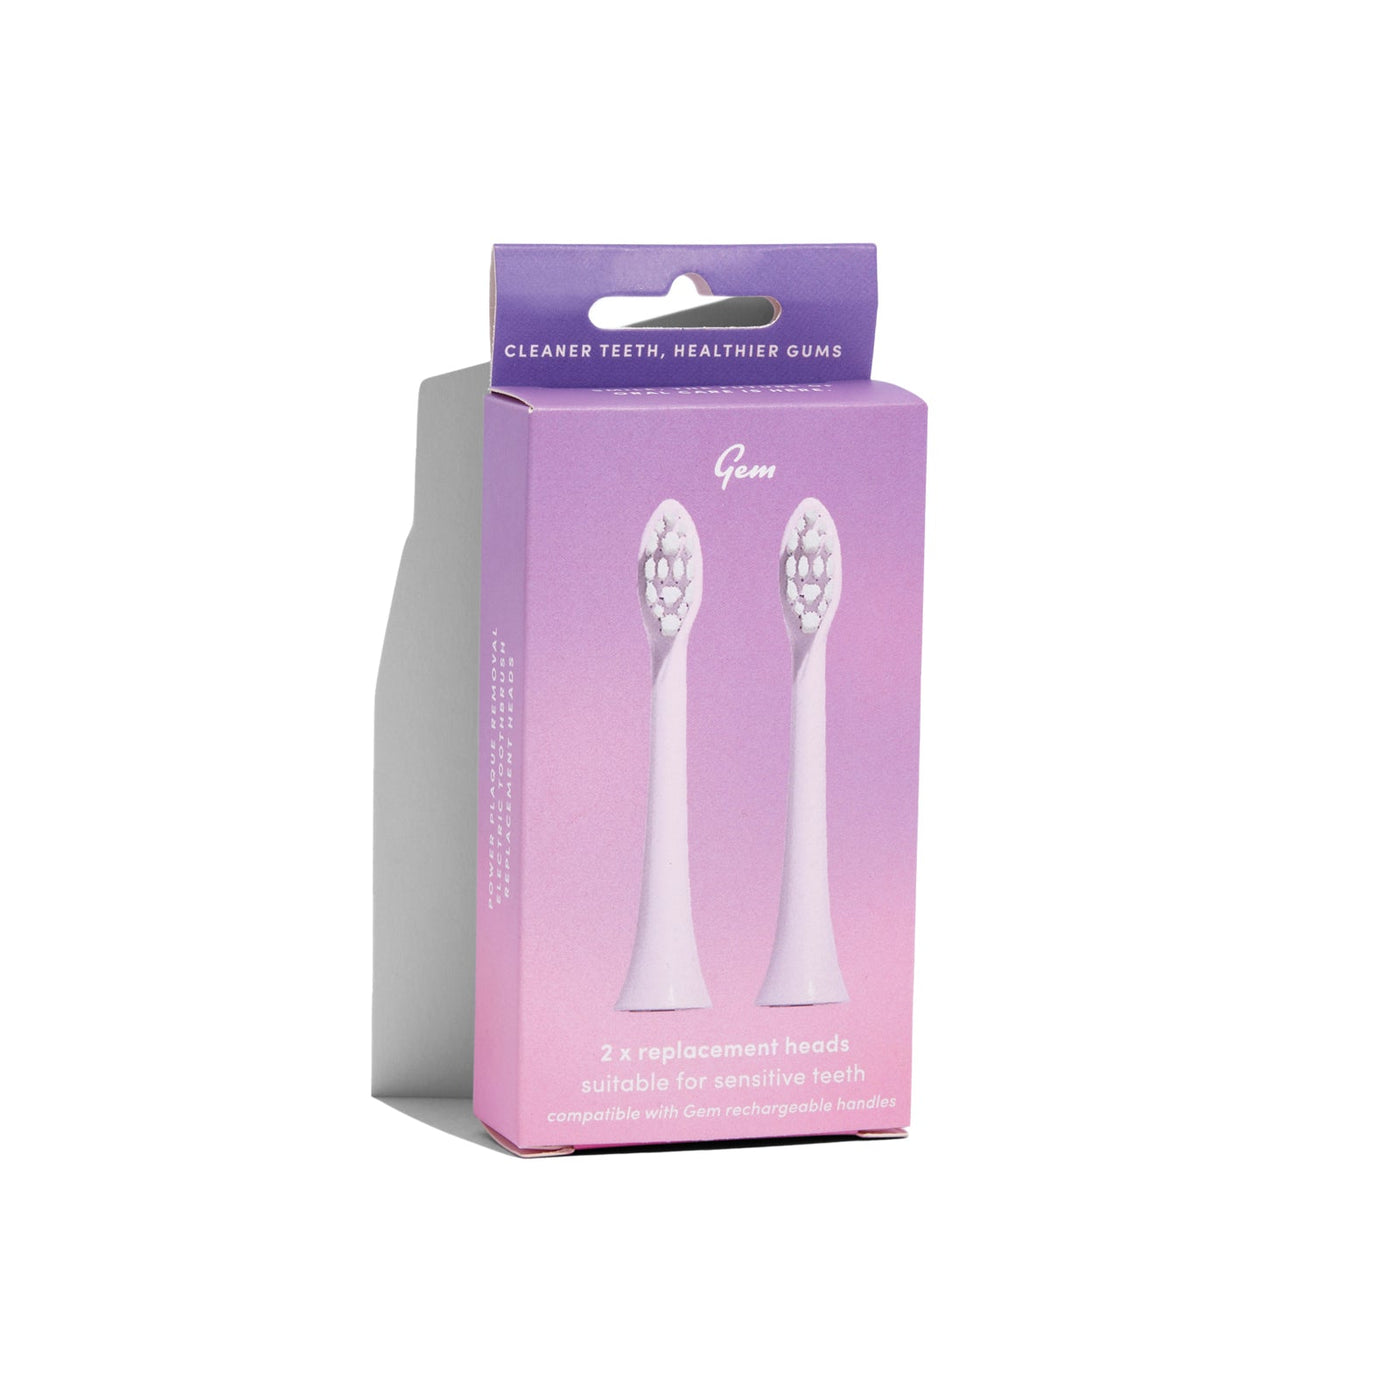 Gem Electric Toothbrush Replacement Heads Rose packaging